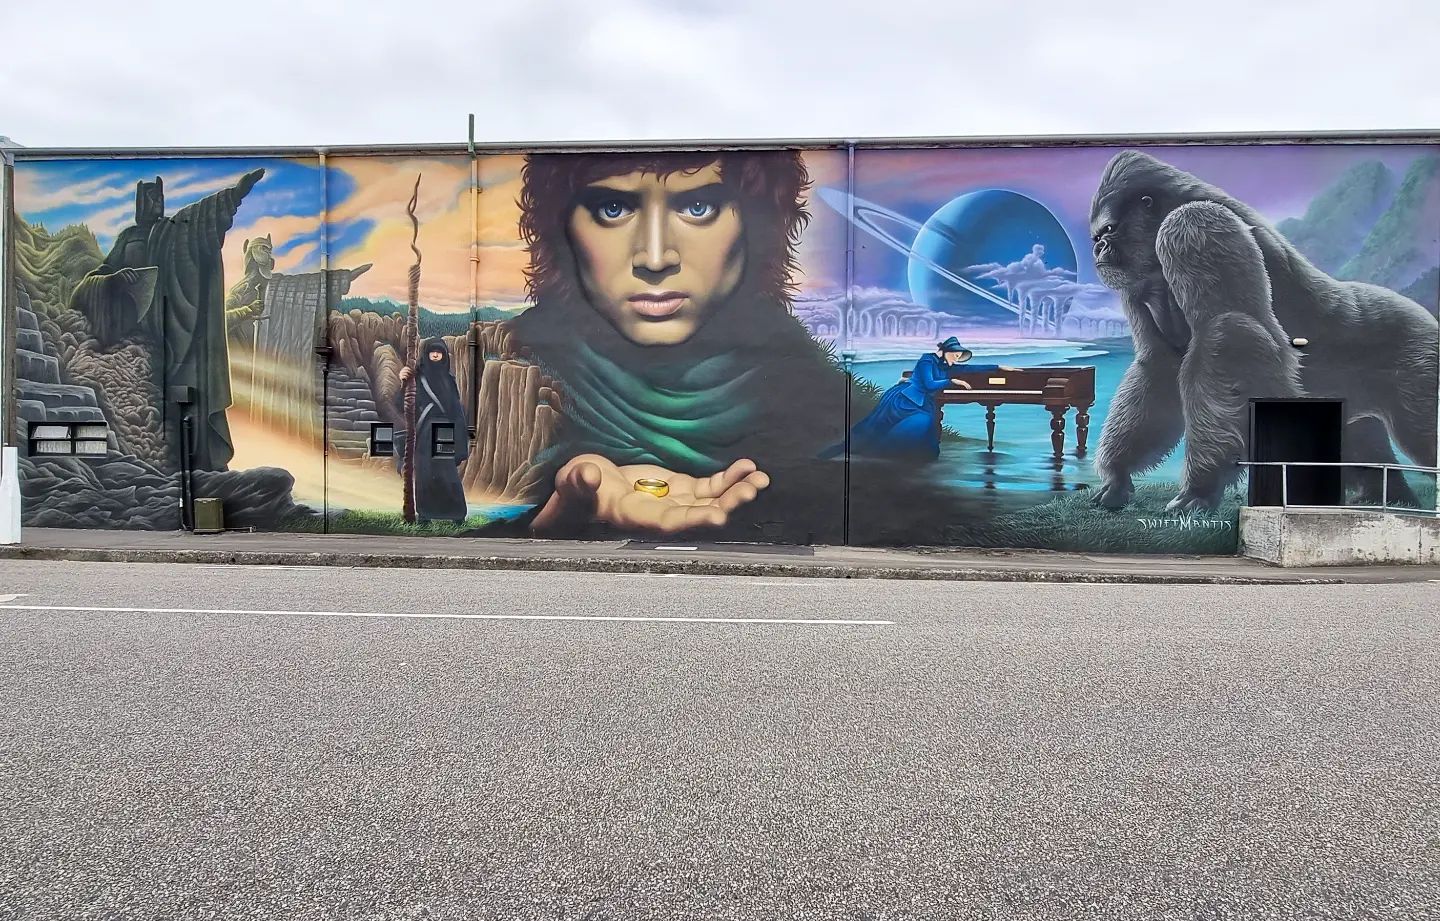 Drove almost by this mural